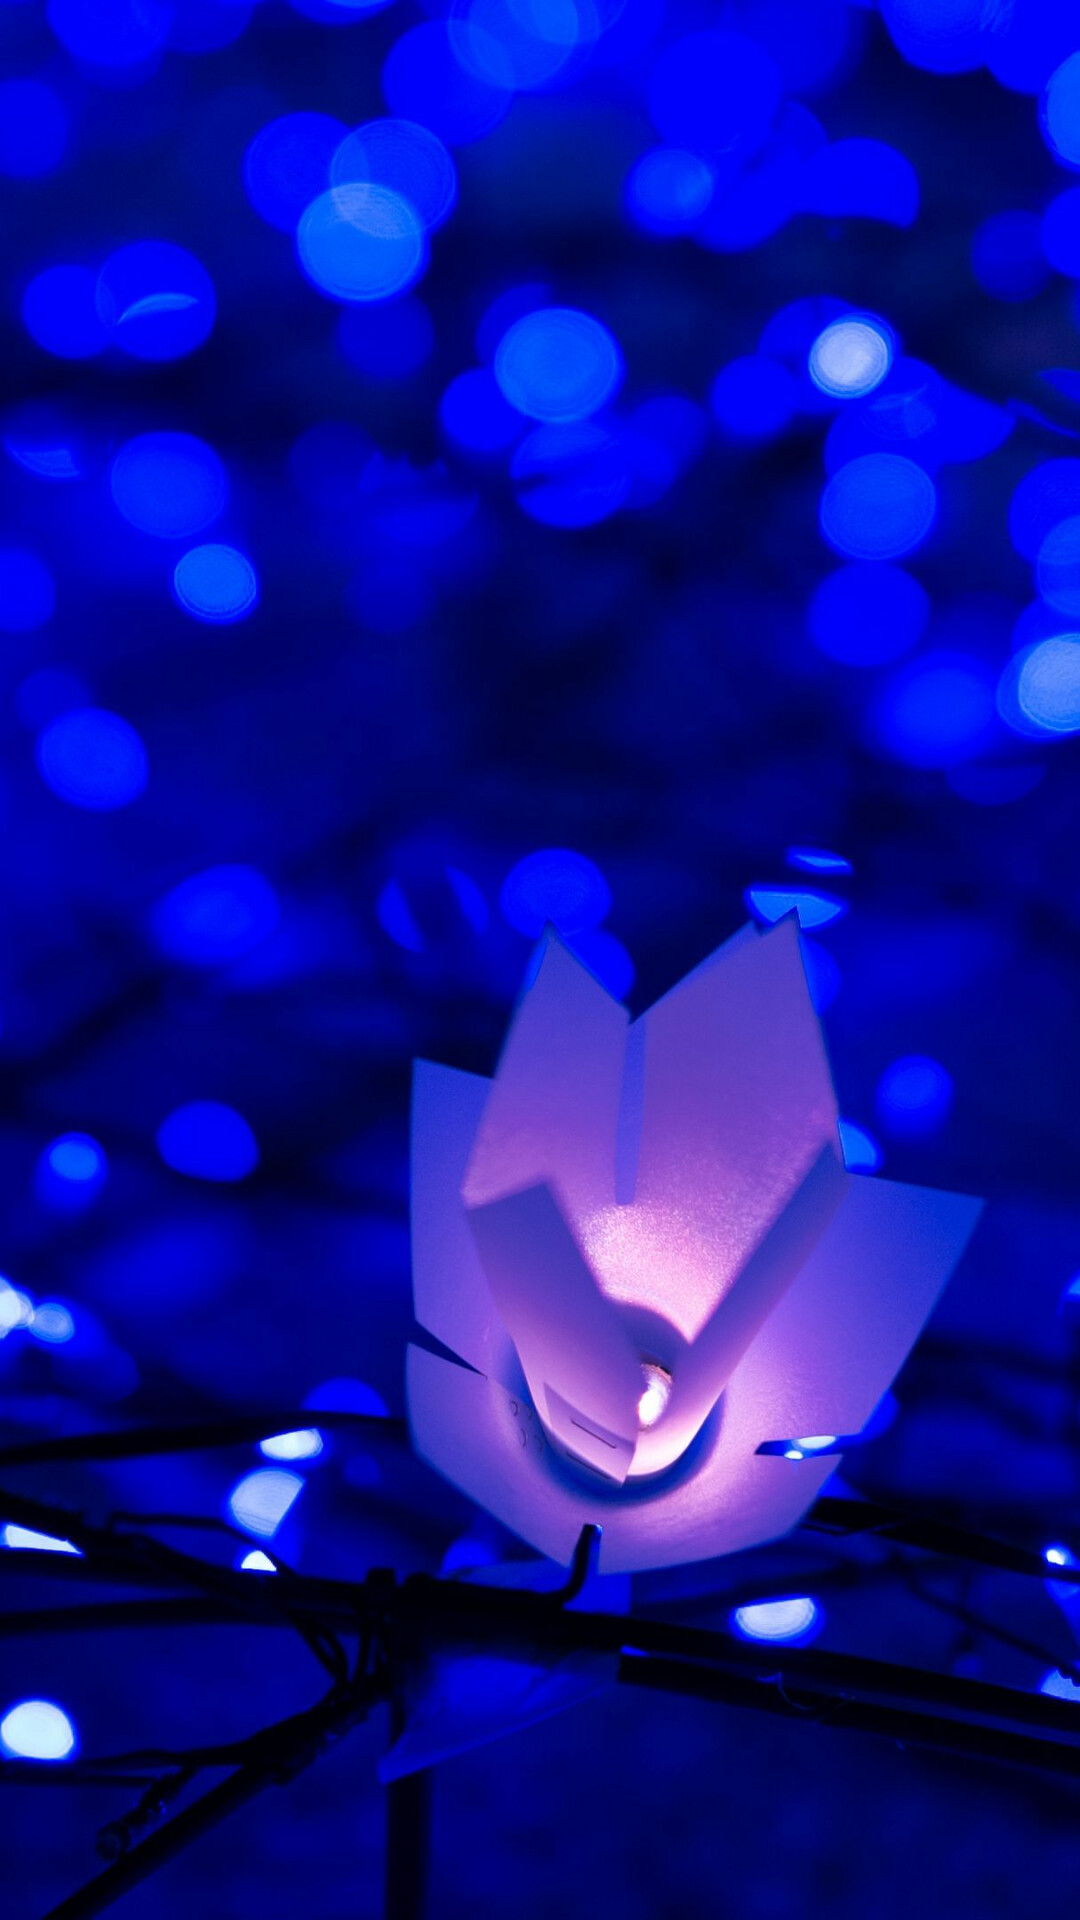 Garland: The illumination made specifically for the Christmas season. 1080x1920 Full HD Background.